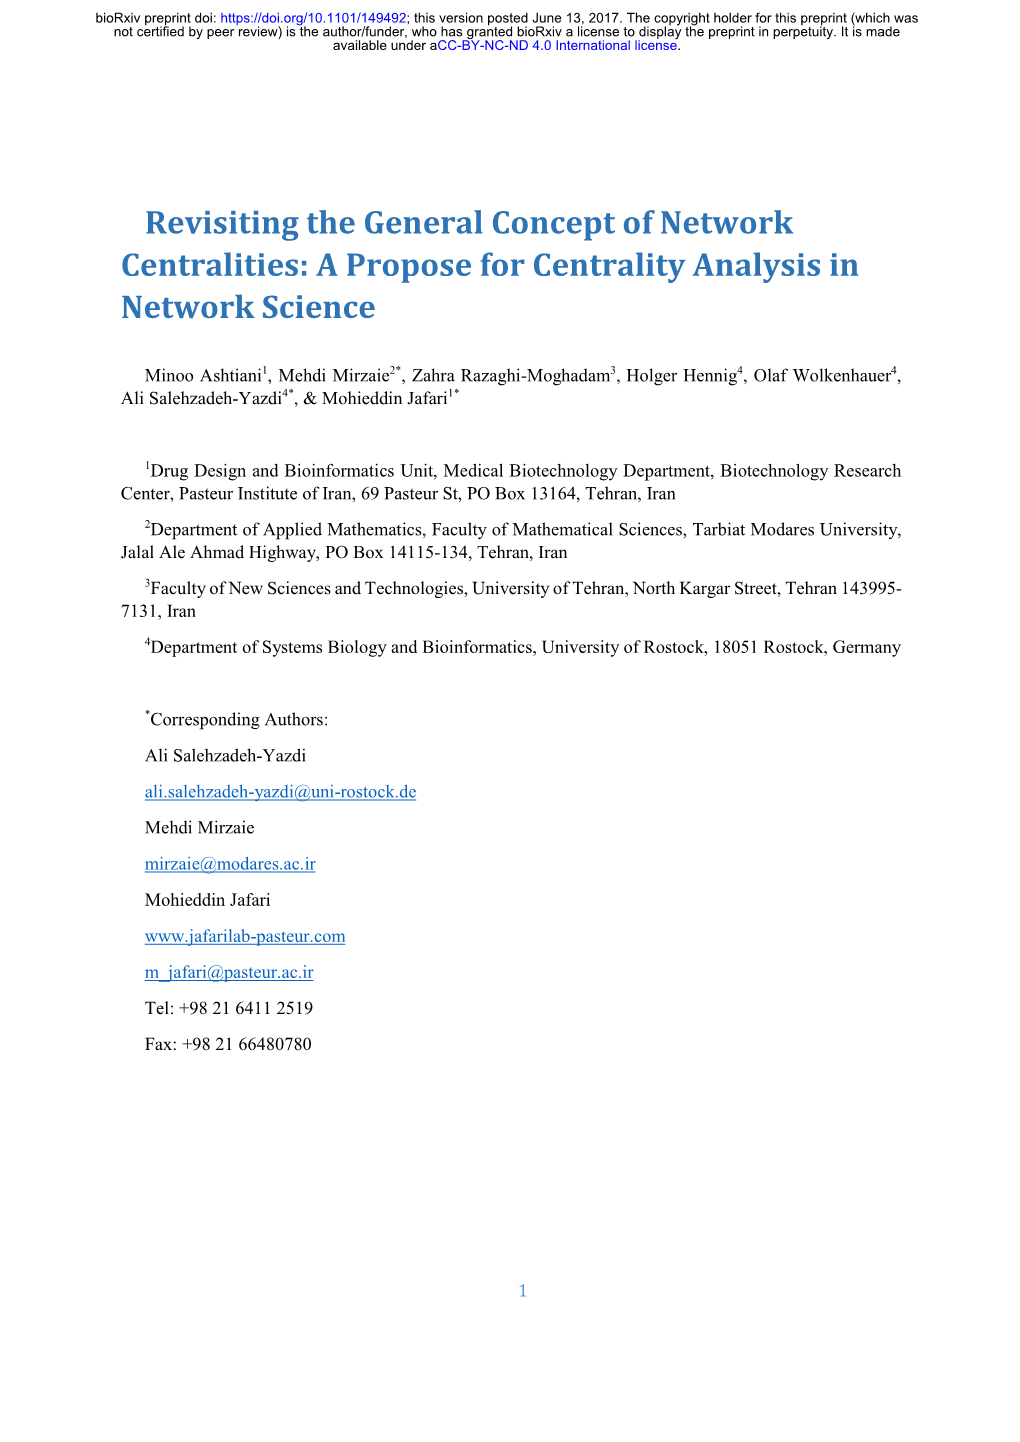 A Propose for Centrality Analysis in Network Science